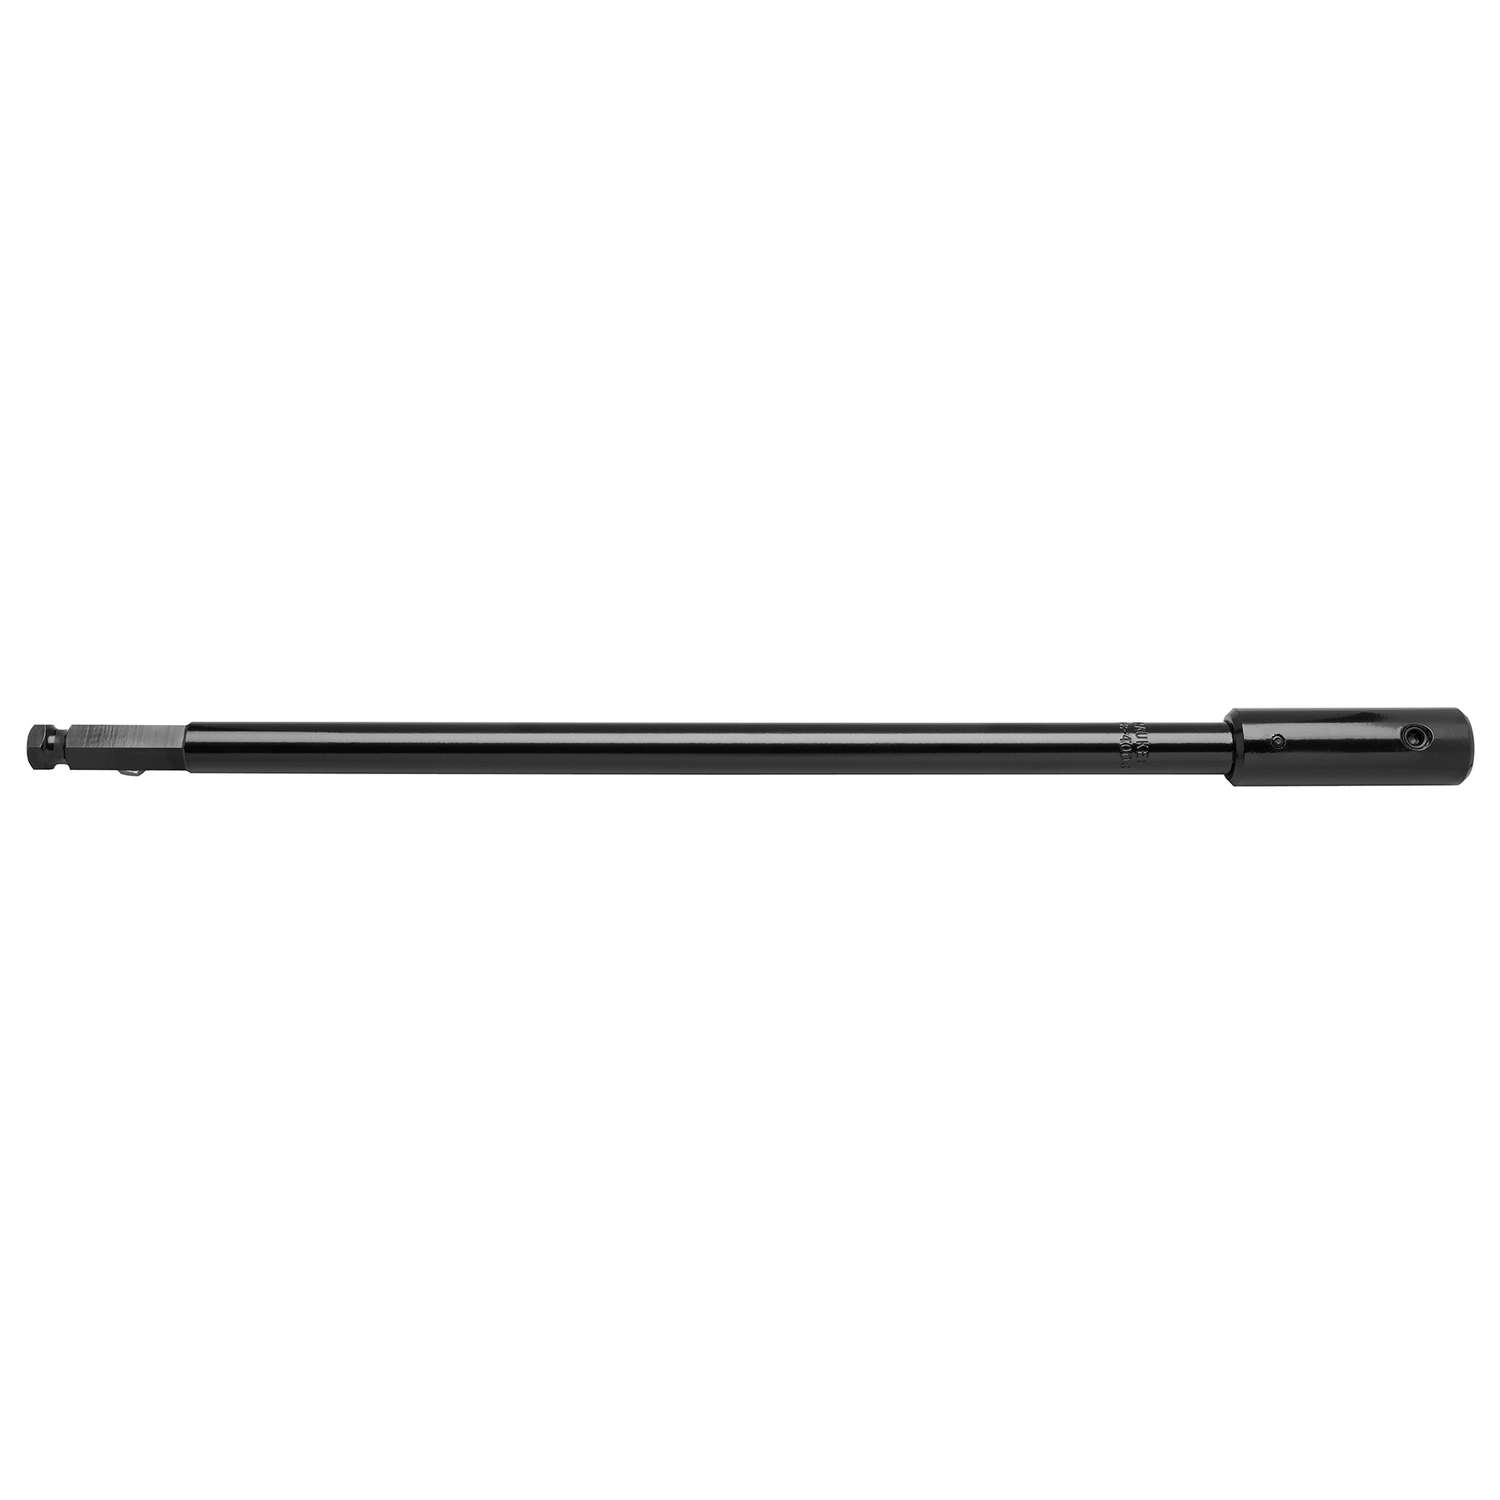 Hex Extension 7/16 Inch X 7/16 Inch X 12 Long For 1/2 Drills 7/16 Male Hex End X 7/16 Female Hex End With Set Screw 12 Inch Long Double It Up For 24 Works With Hex Augers Hole Saws & Drill Bits 